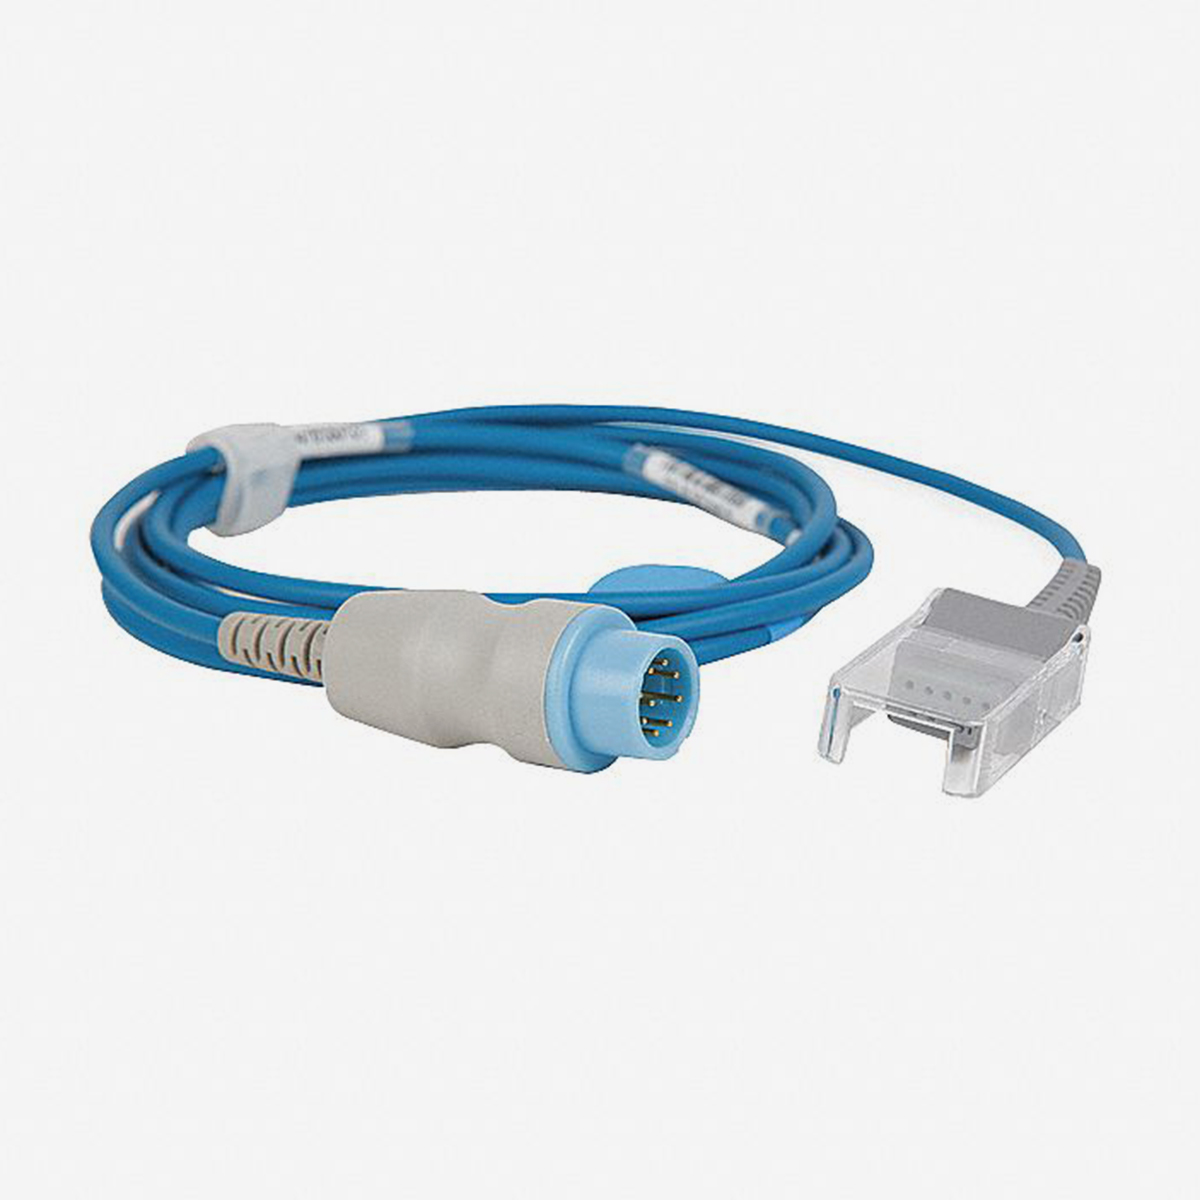 Blue extension cable with white and blue connector for pediatric disposable finger probe